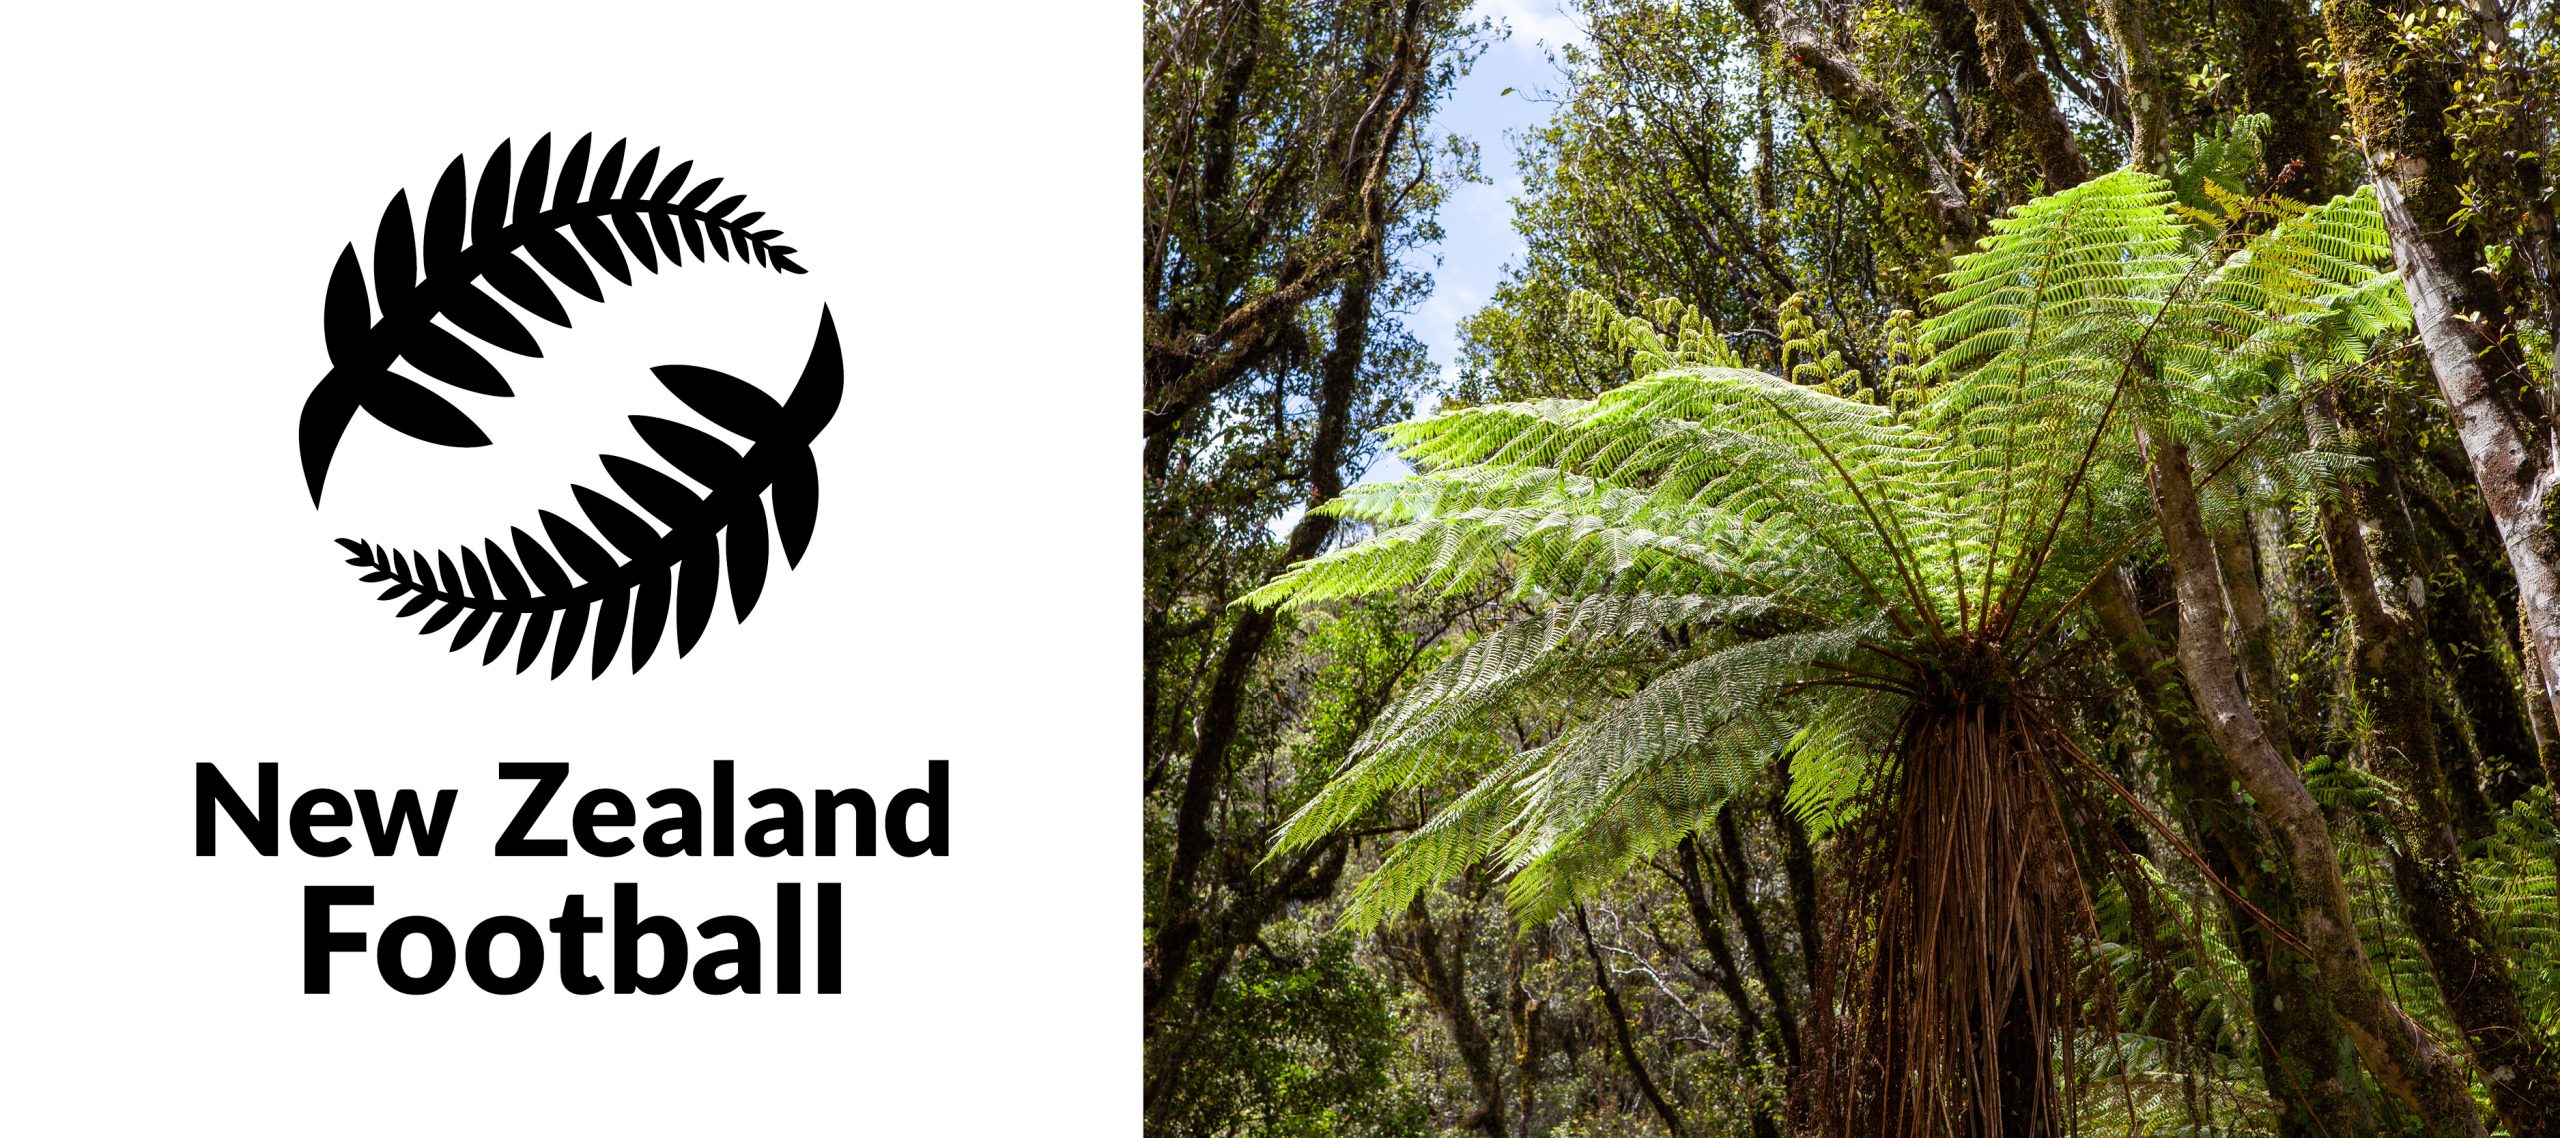 The New Zealand Football Ferns logo. Right: Silver tree fern (Alsophila tricolor), endemic to New Zealand.